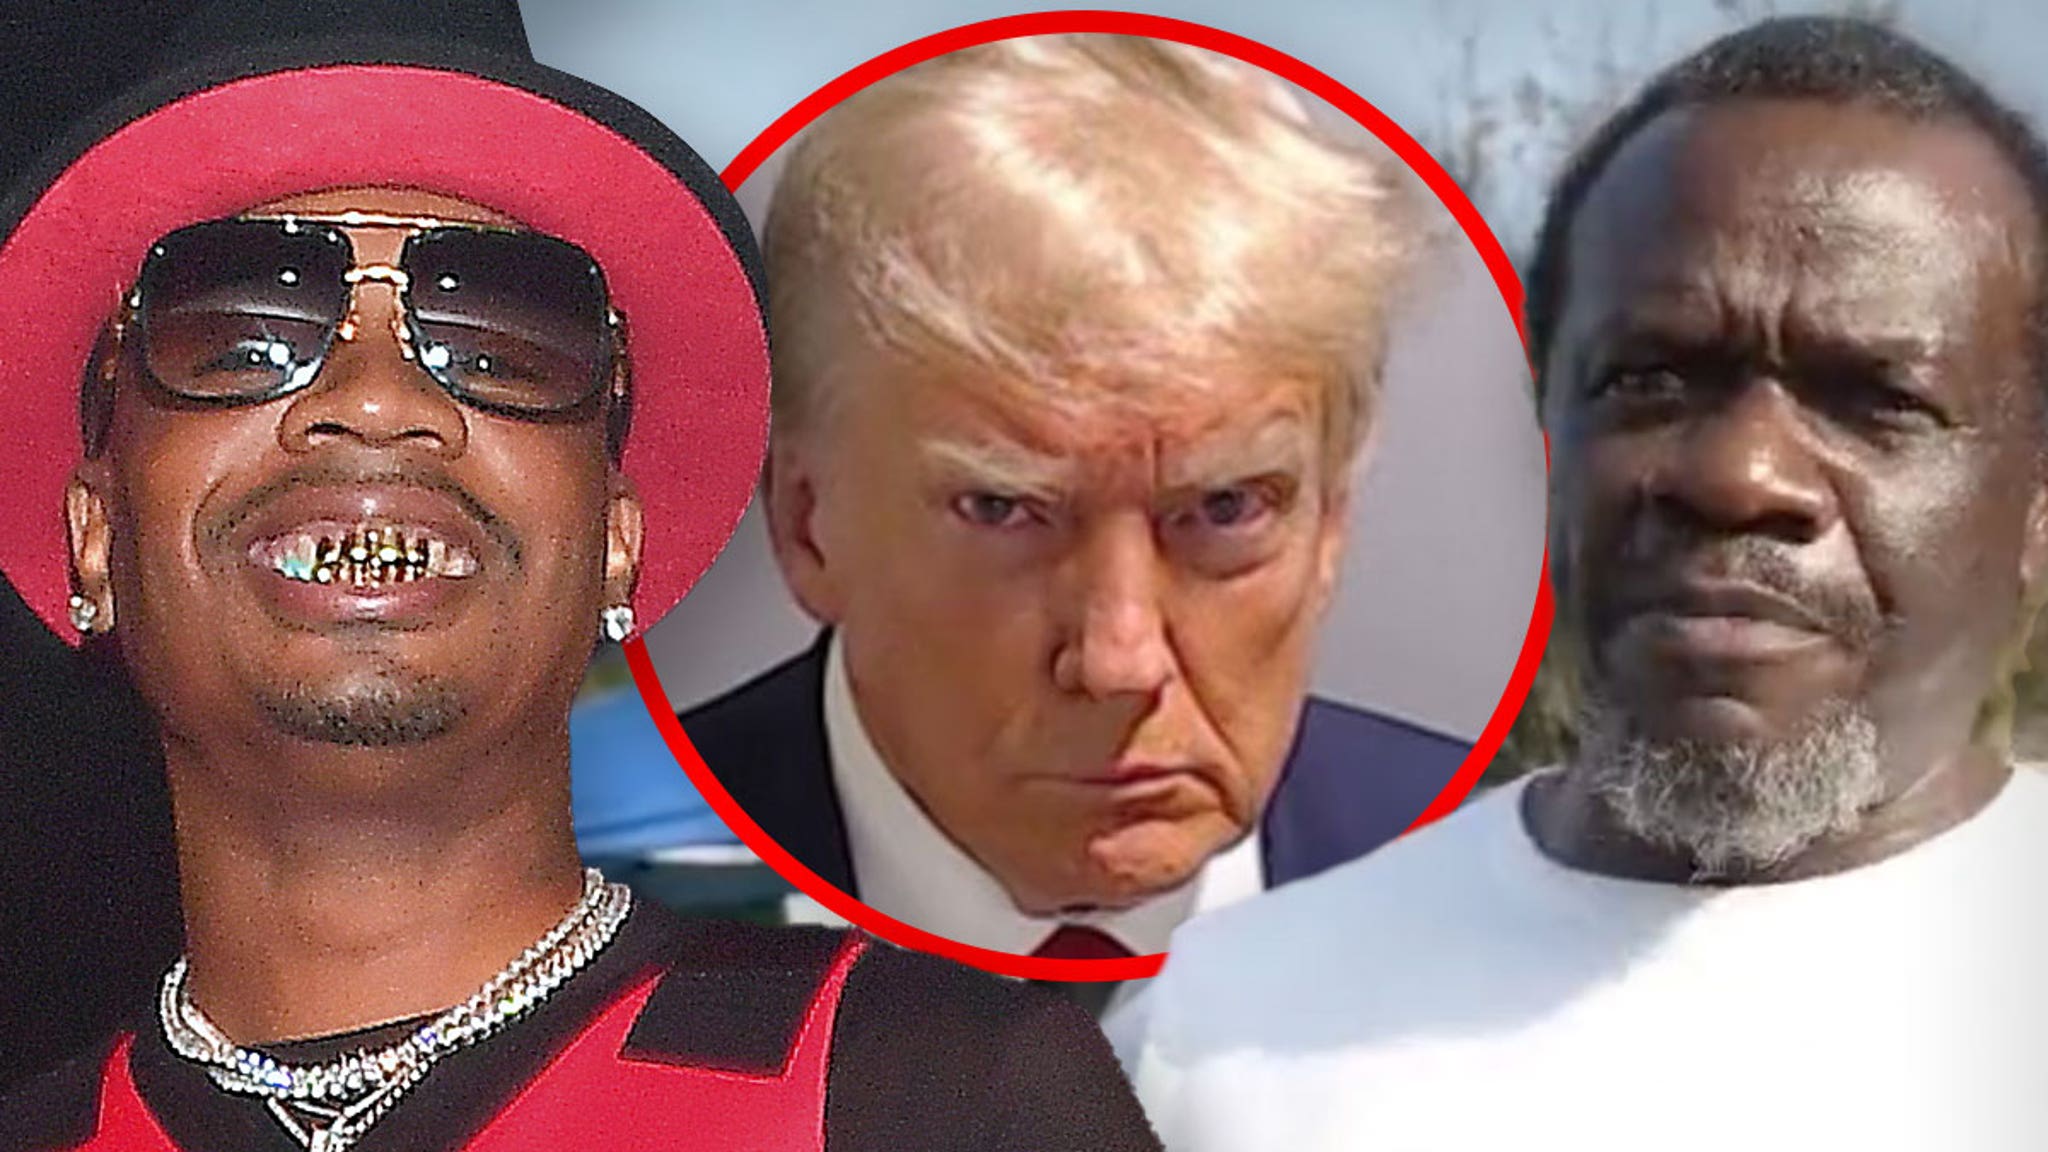 Plies Clowns support black Trump supporters after mug shot and indictment